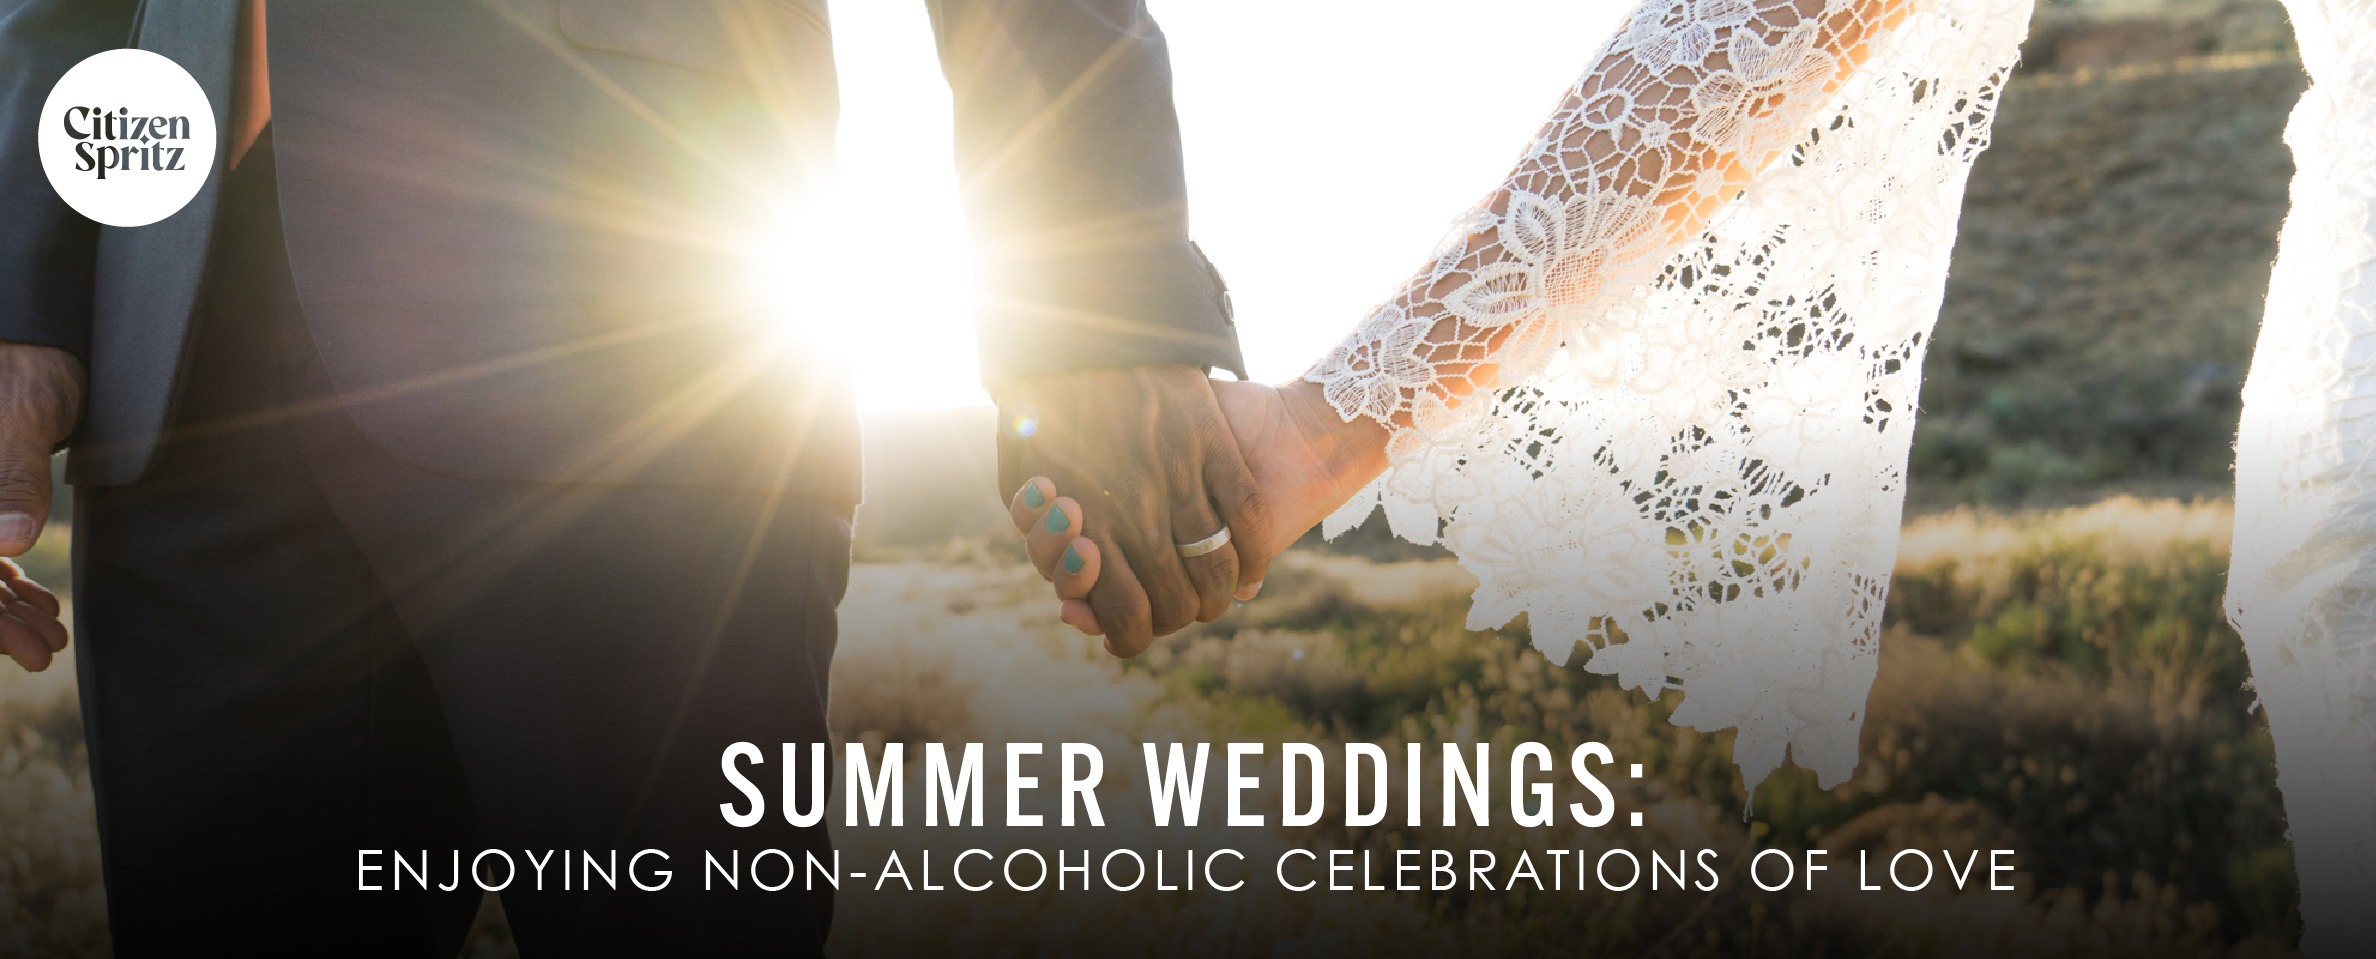 A couple holding hands with the sun shining brightly behind them, creating a warm glow. The person on the left is wearing a dark suit, and the person on the right is wearing a white lace dress. The text on the image reads 'Citizen Spritz - Summer Weddings: Enjoying Non-Alcoholic Celebrations of Love' in white letters.